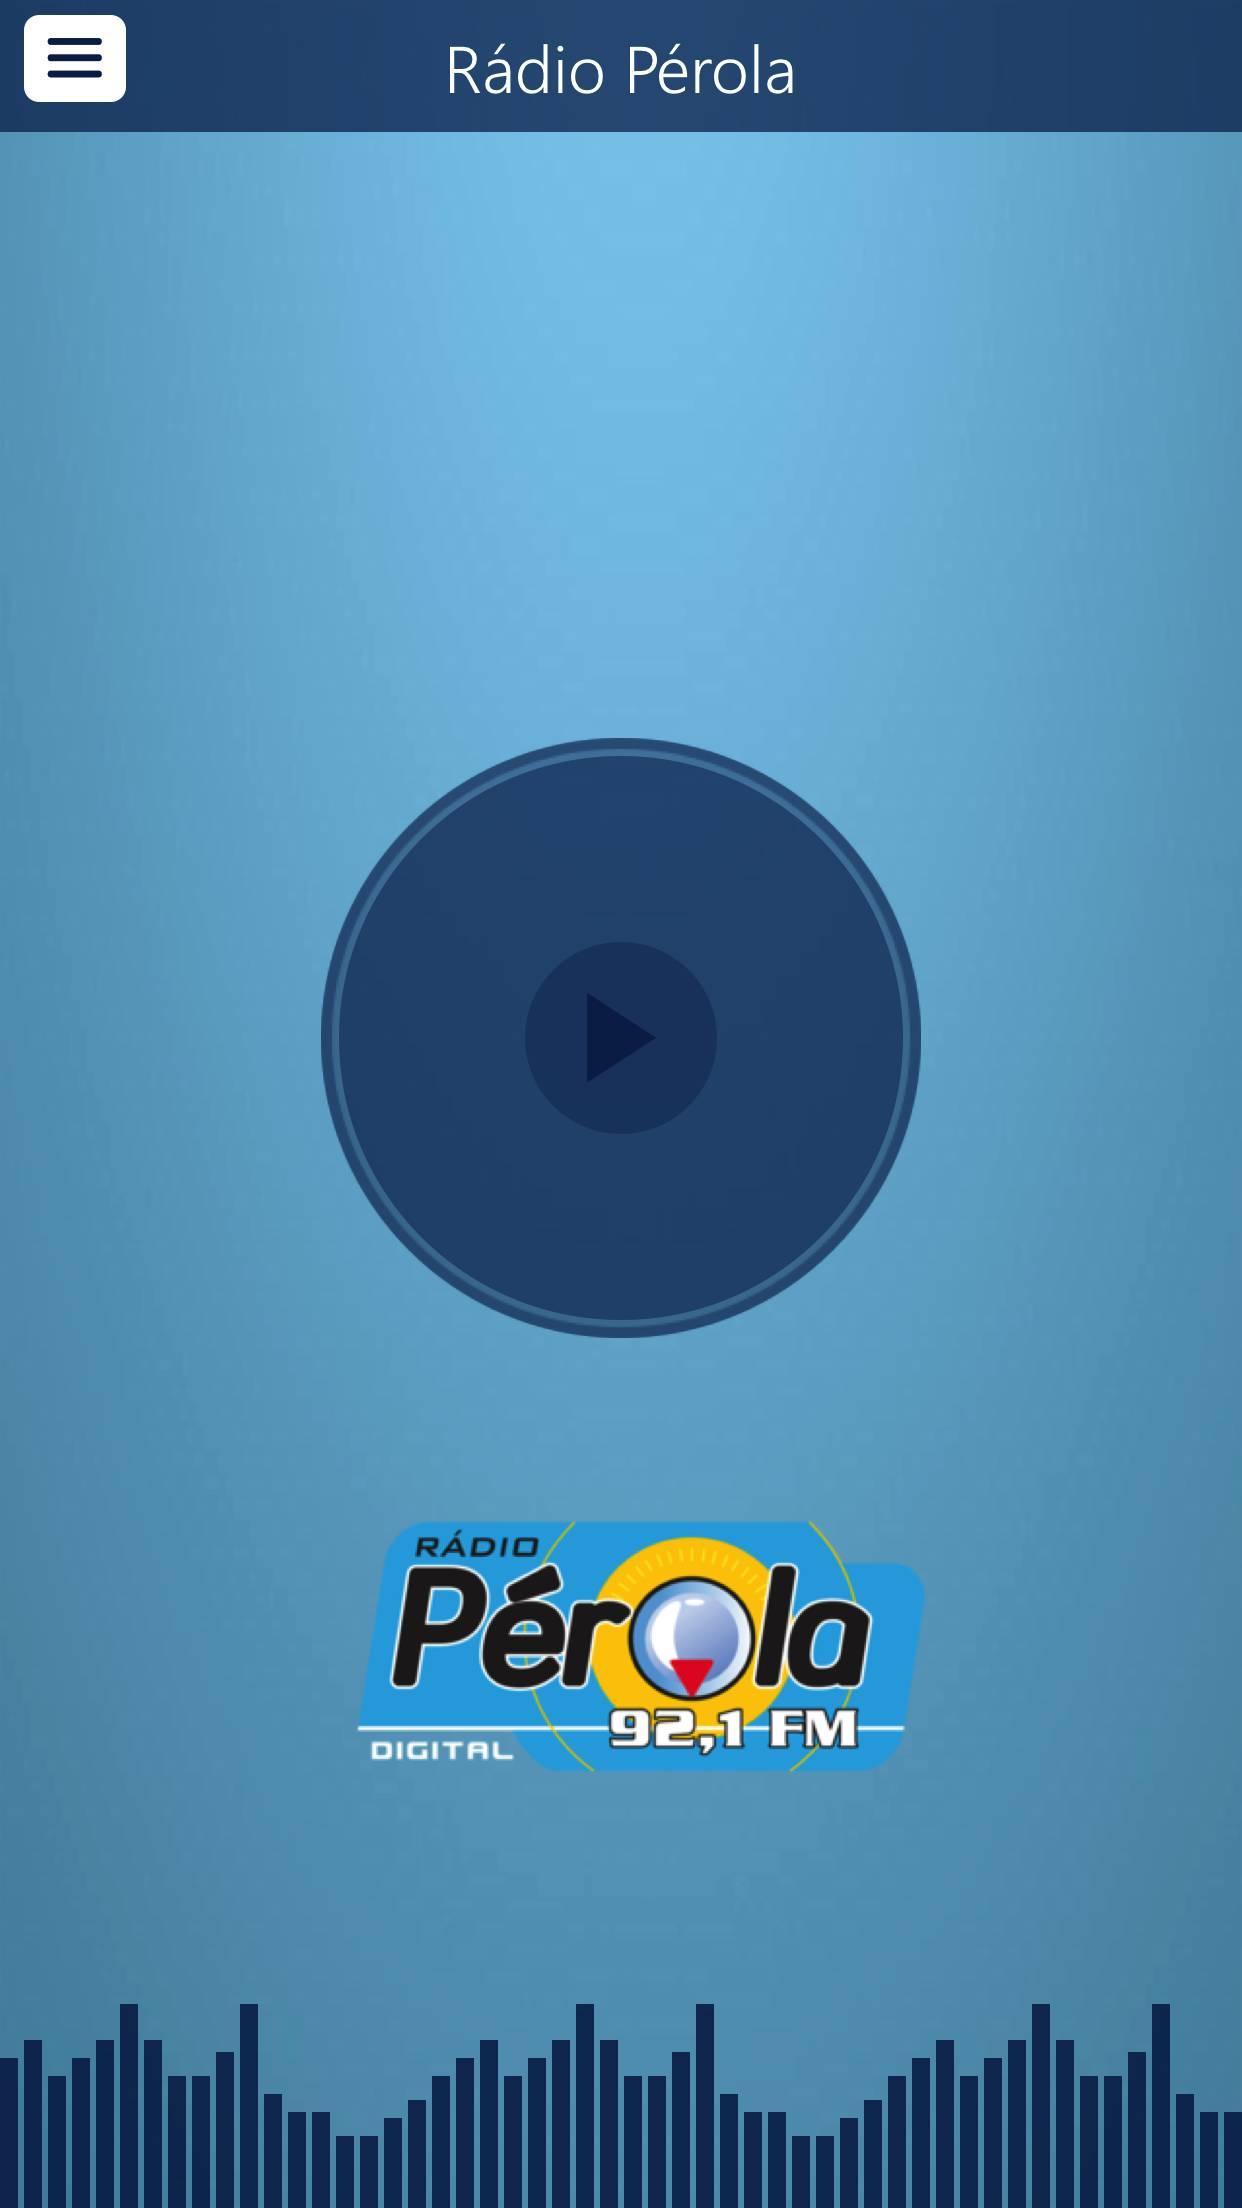 Radio Perola 92,1 FM for Android - APK Download